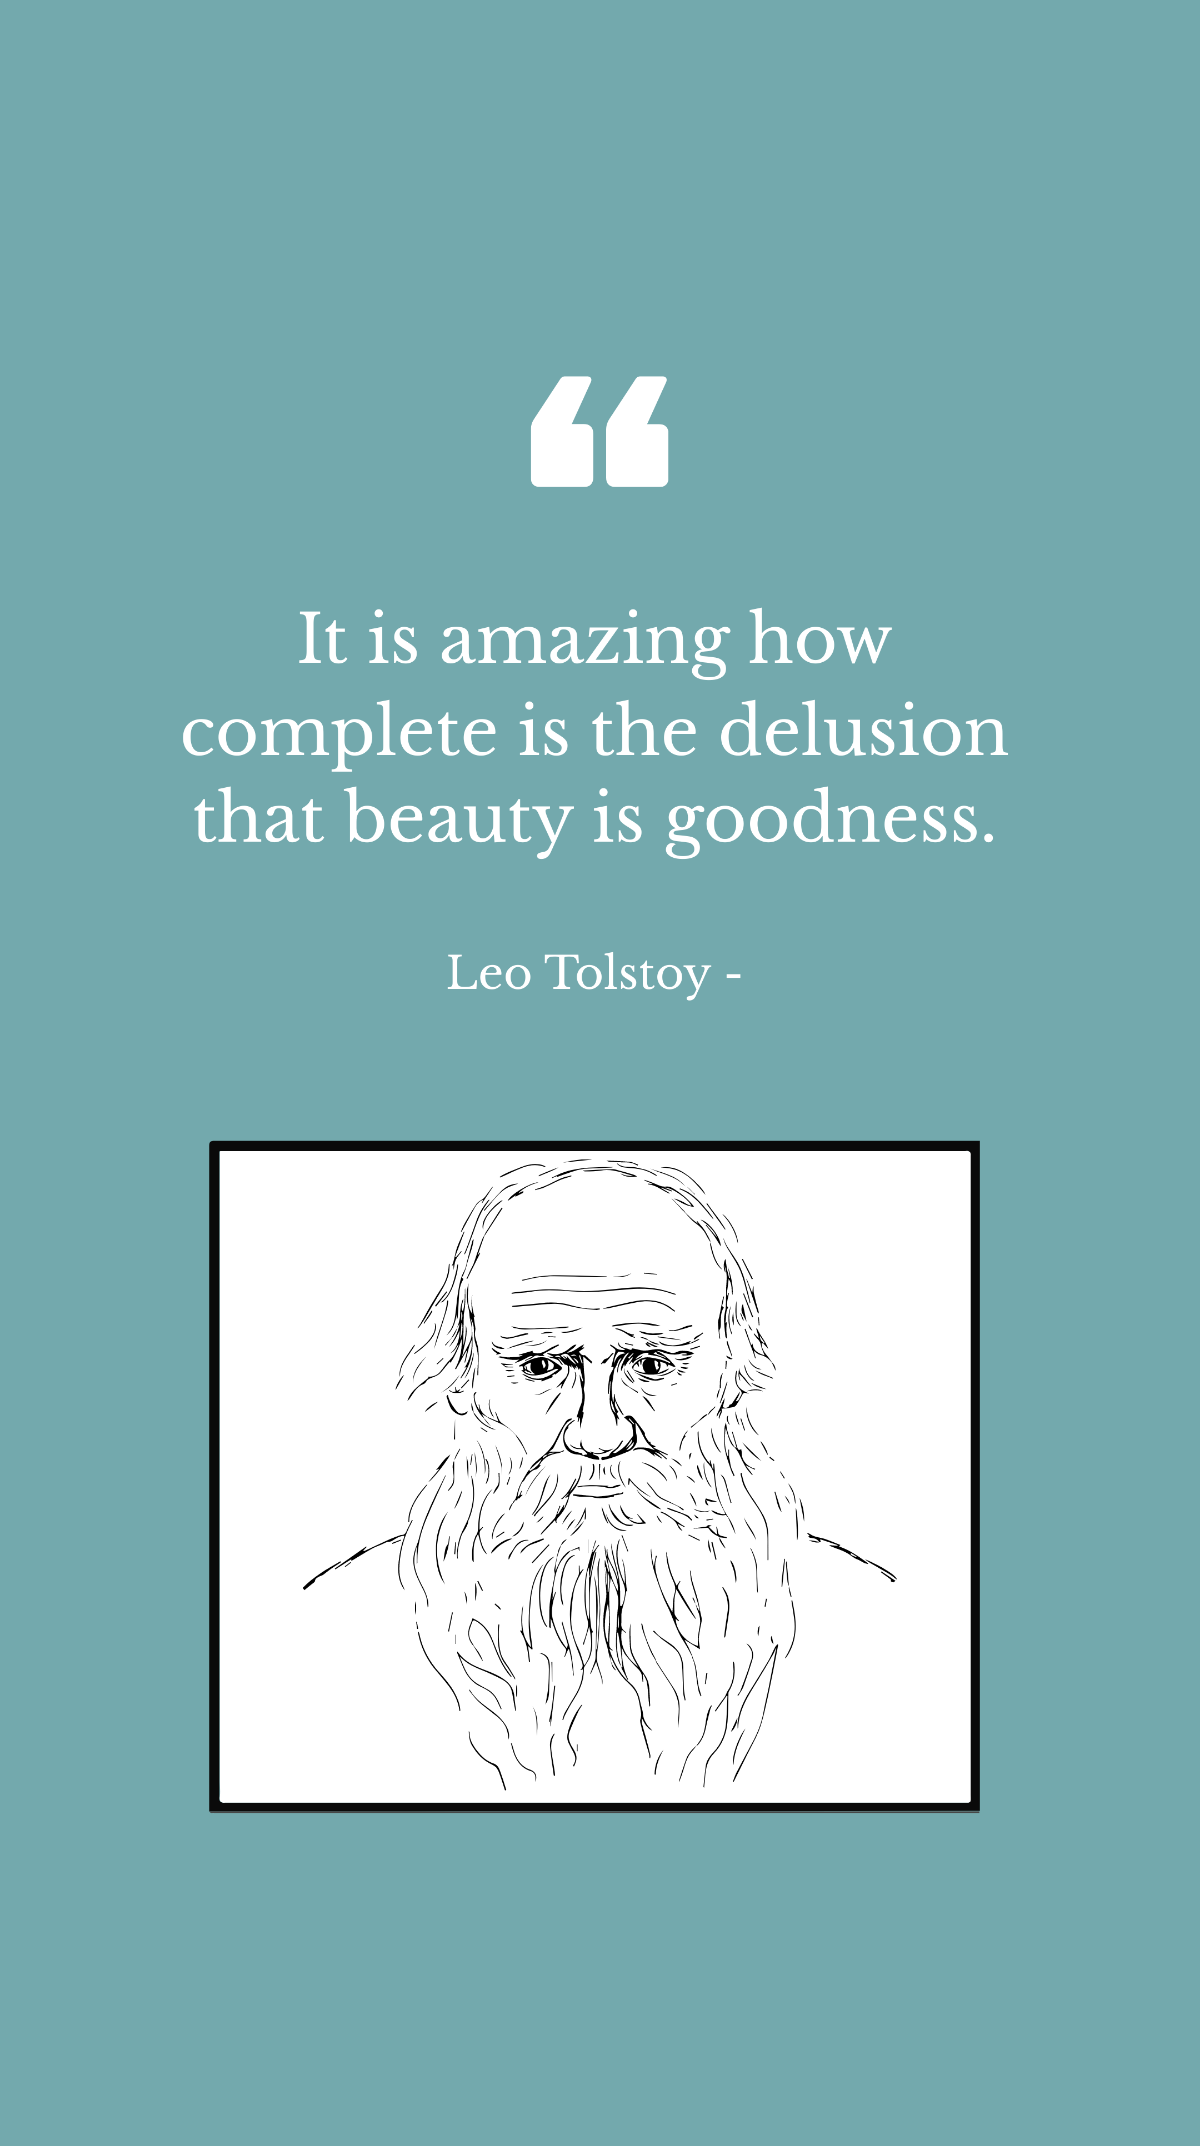 Free Leo Tolstoy - It is amazing how complete is the delusion that beauty is goodness. Template